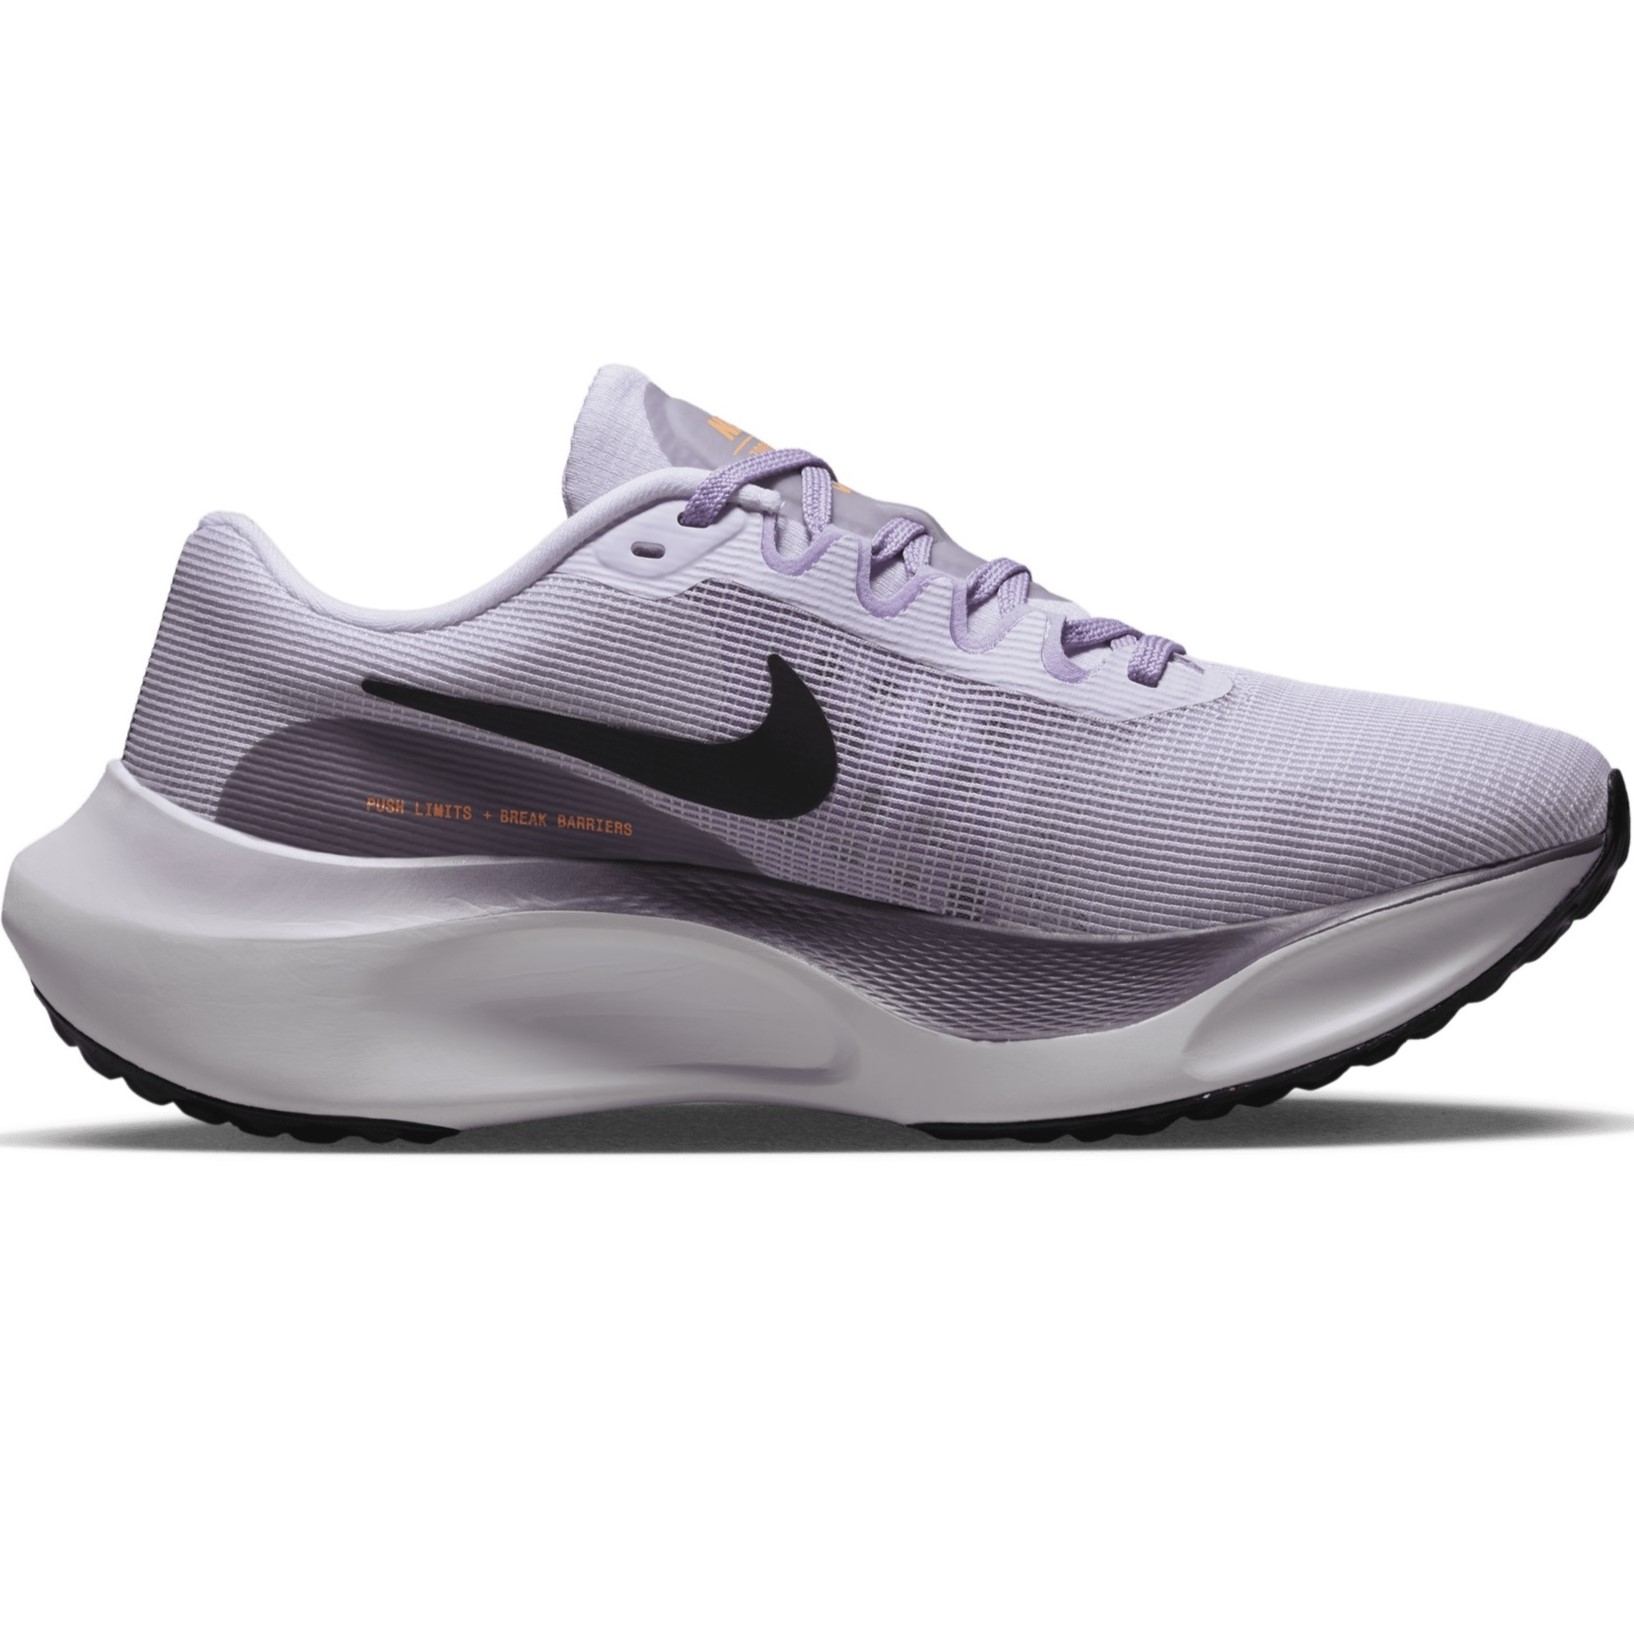 GIÀY THỂ THAO NIKE NỮ ZOOM FLY 5 WOMEN ROAD RUNNING SHOES BARELY GRAPE DM8974-500 1